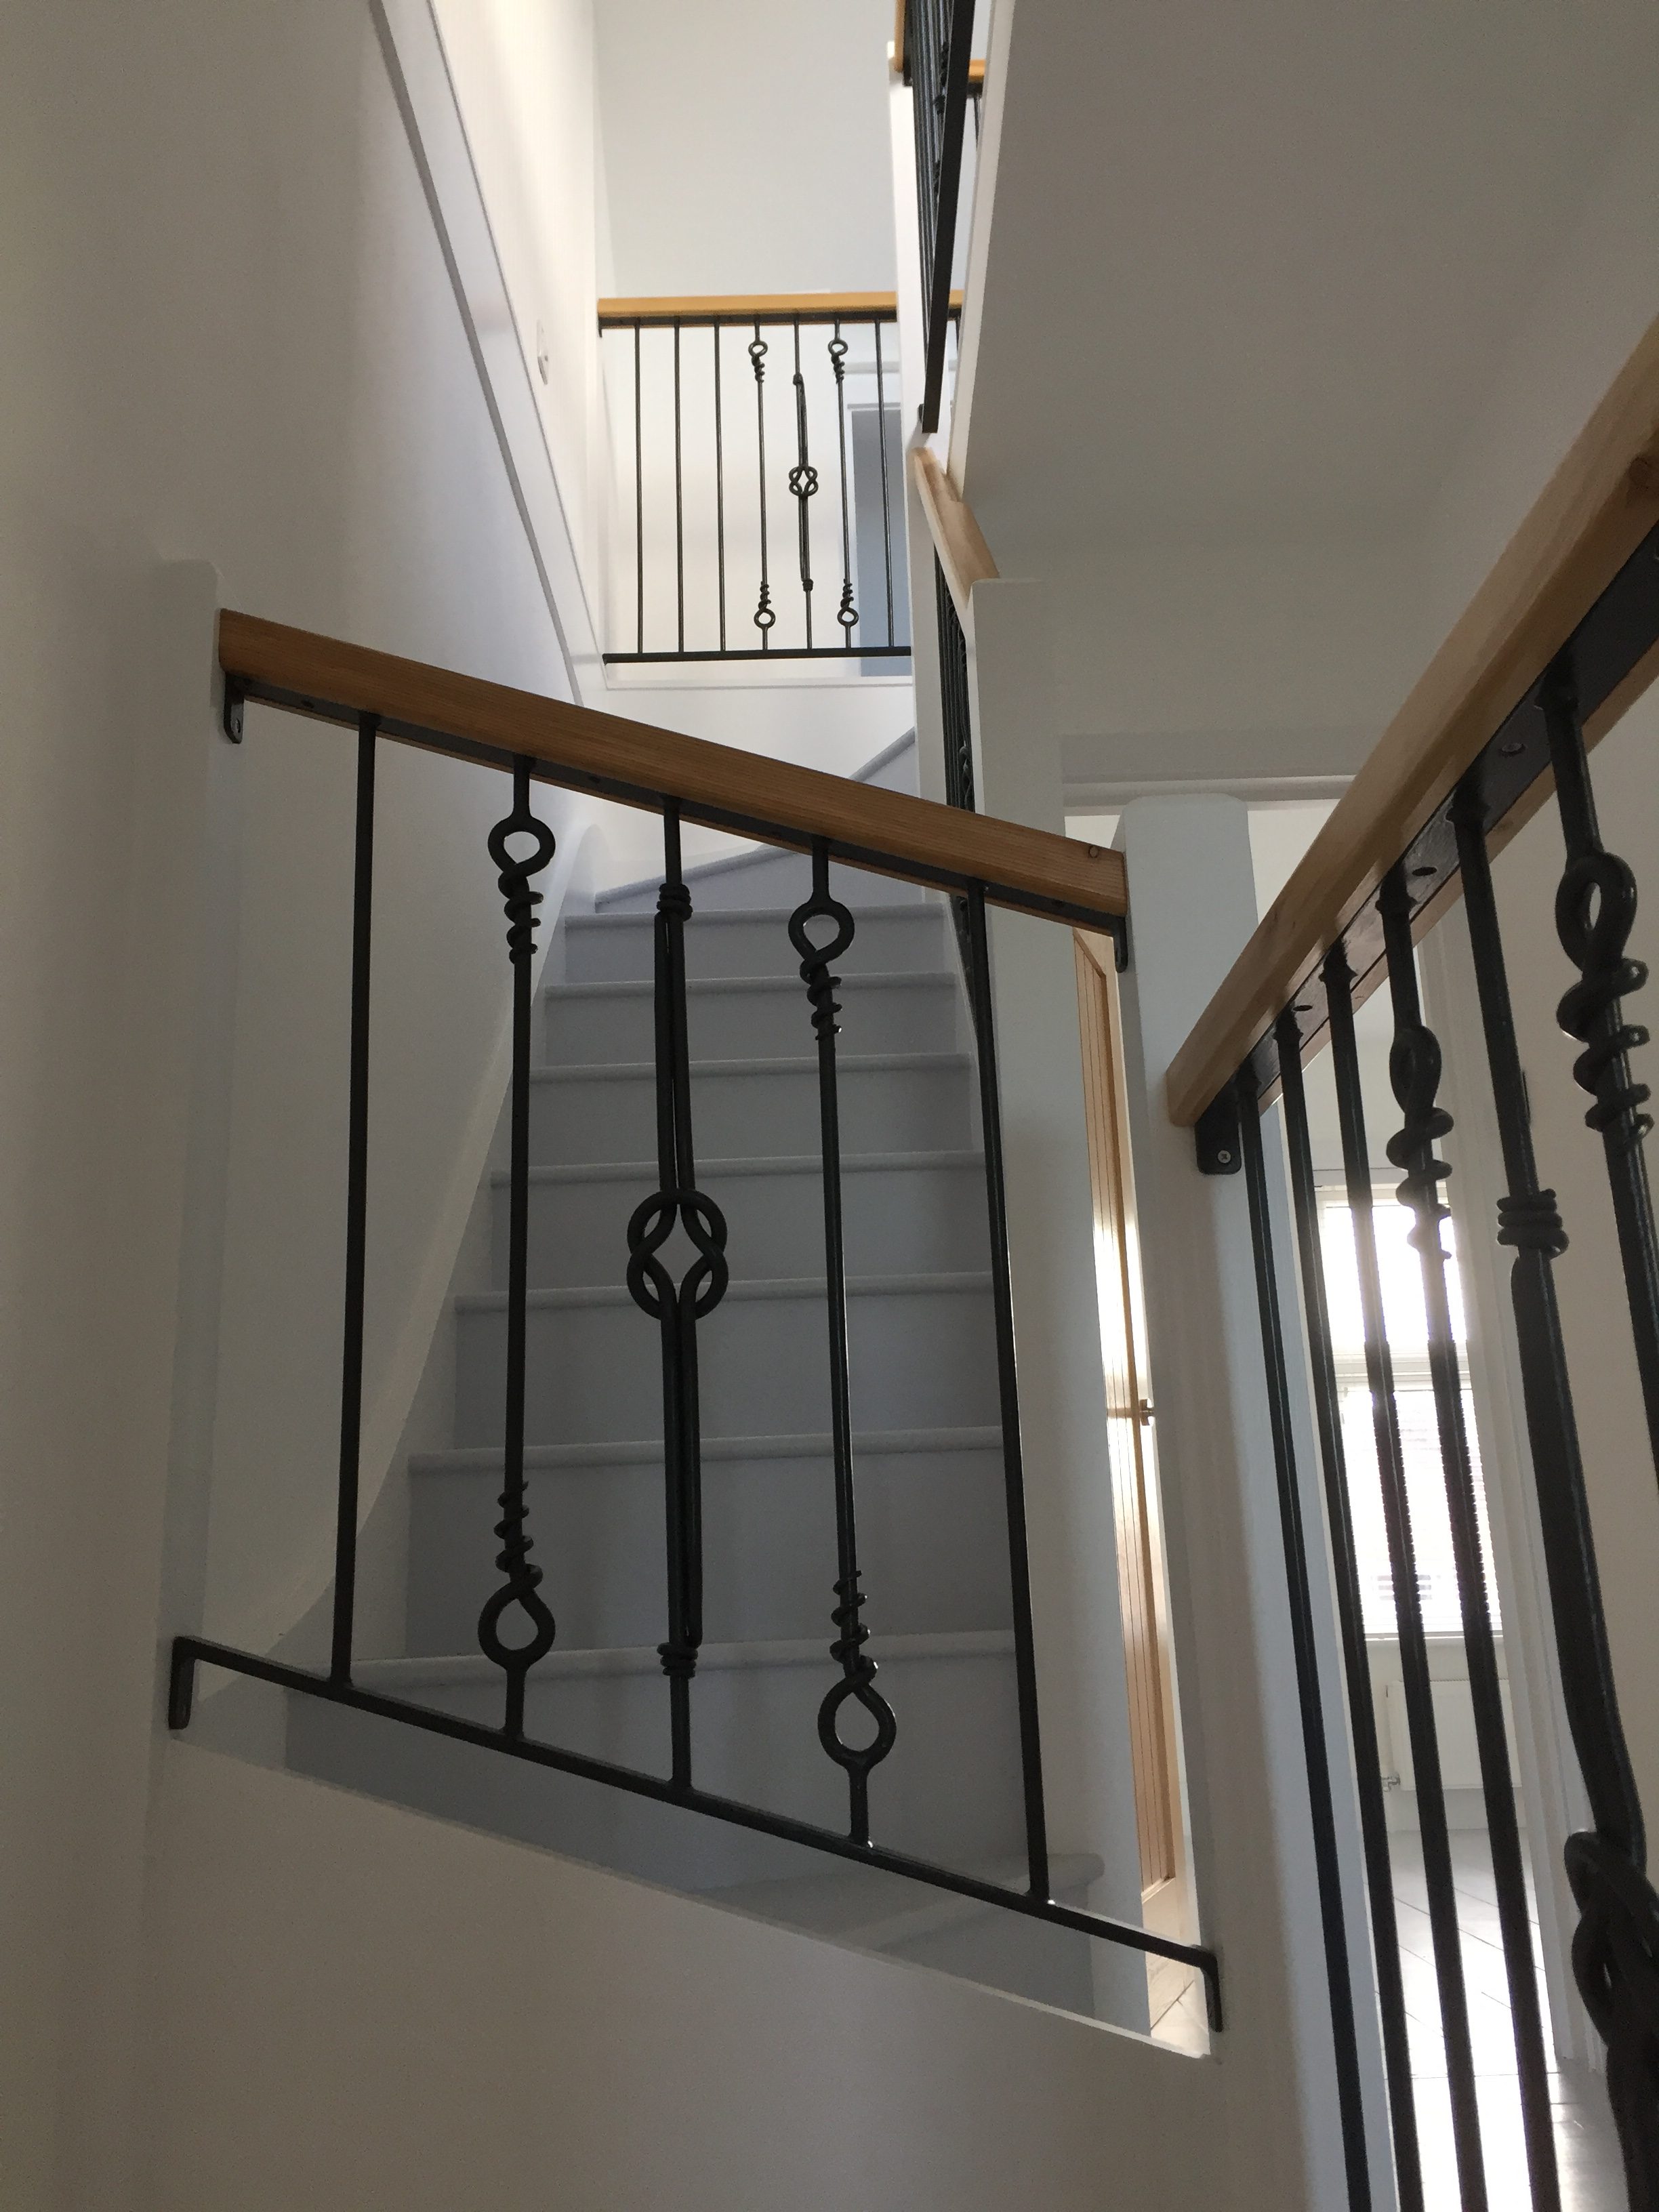 Decorative staircase banister